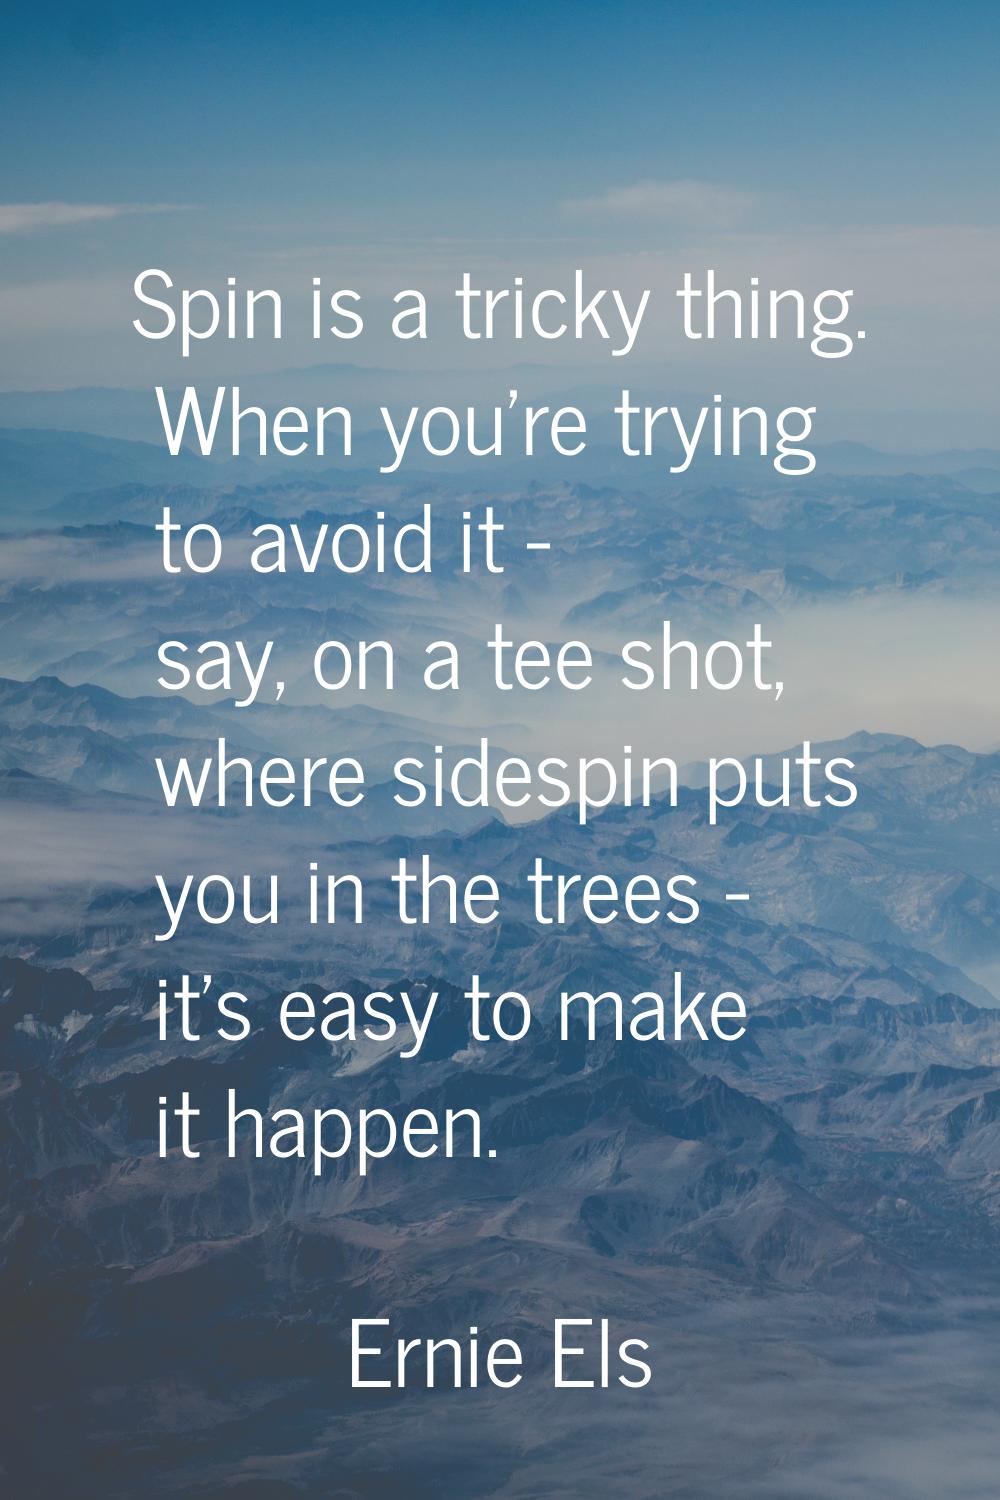 Spin is a tricky thing. When you're trying to avoid it - say, on a tee shot, where sidespin puts yo